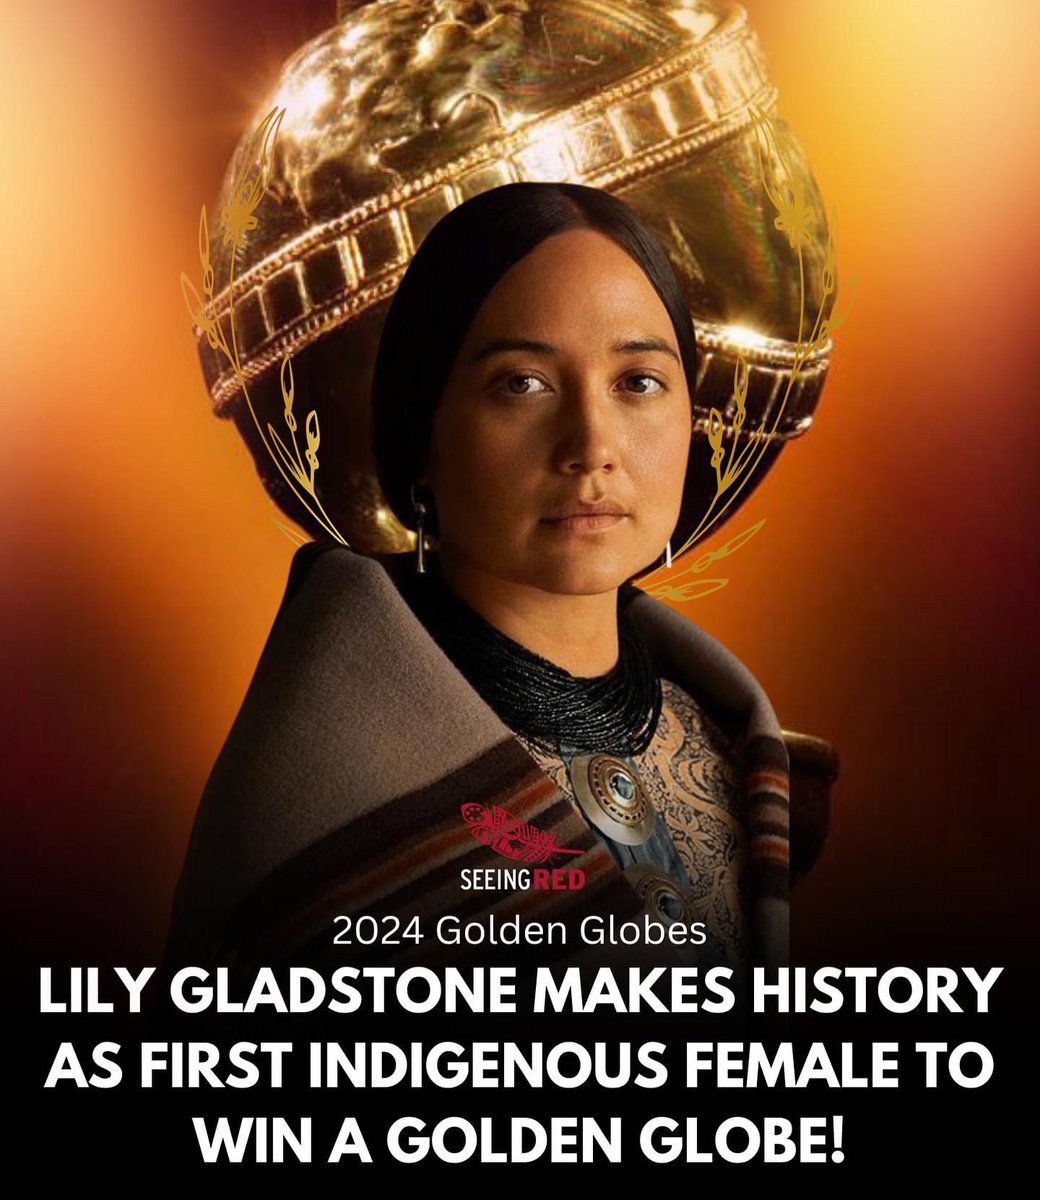 Please join me in celebrating Lily Gladstone’s remarkable cinematic achievement.